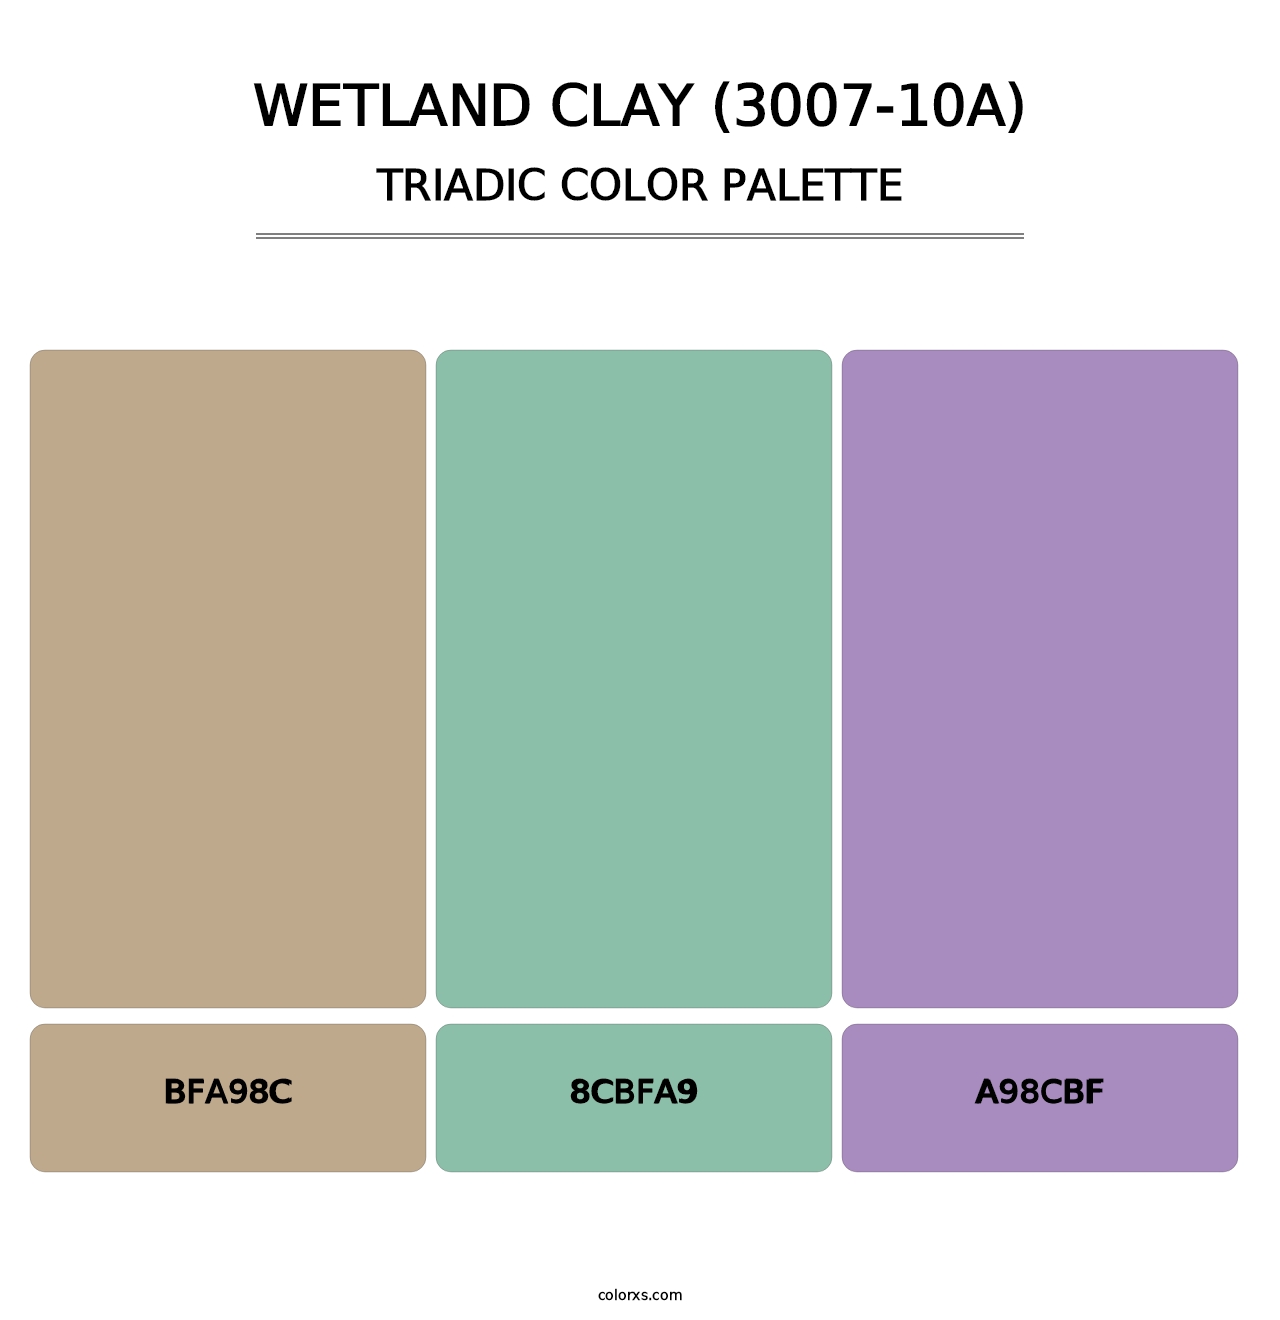 Wetland Clay (3007-10A) - Triadic Color Palette